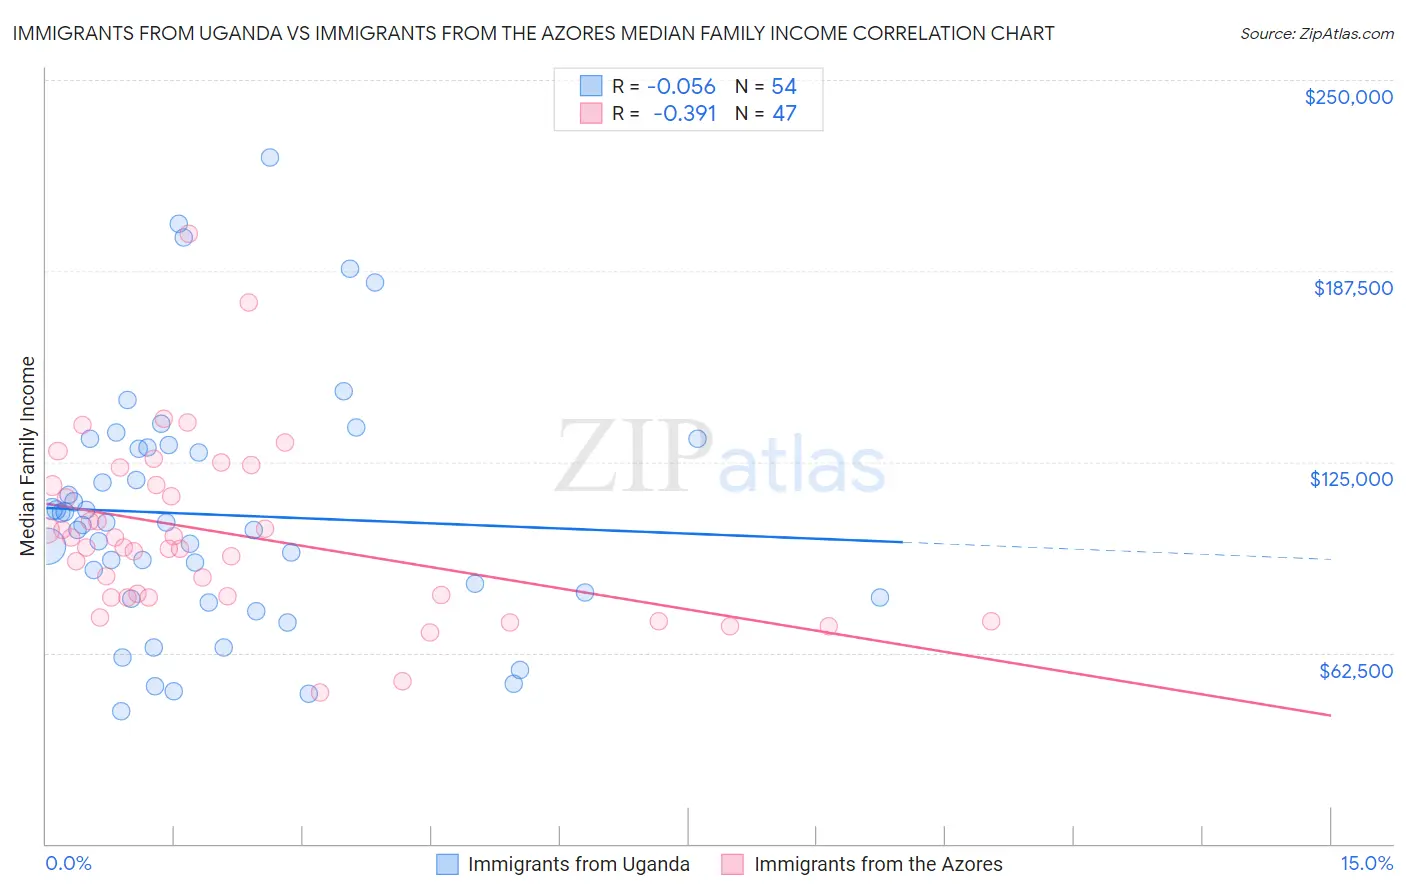 Immigrants from Uganda vs Immigrants from the Azores Median Family Income